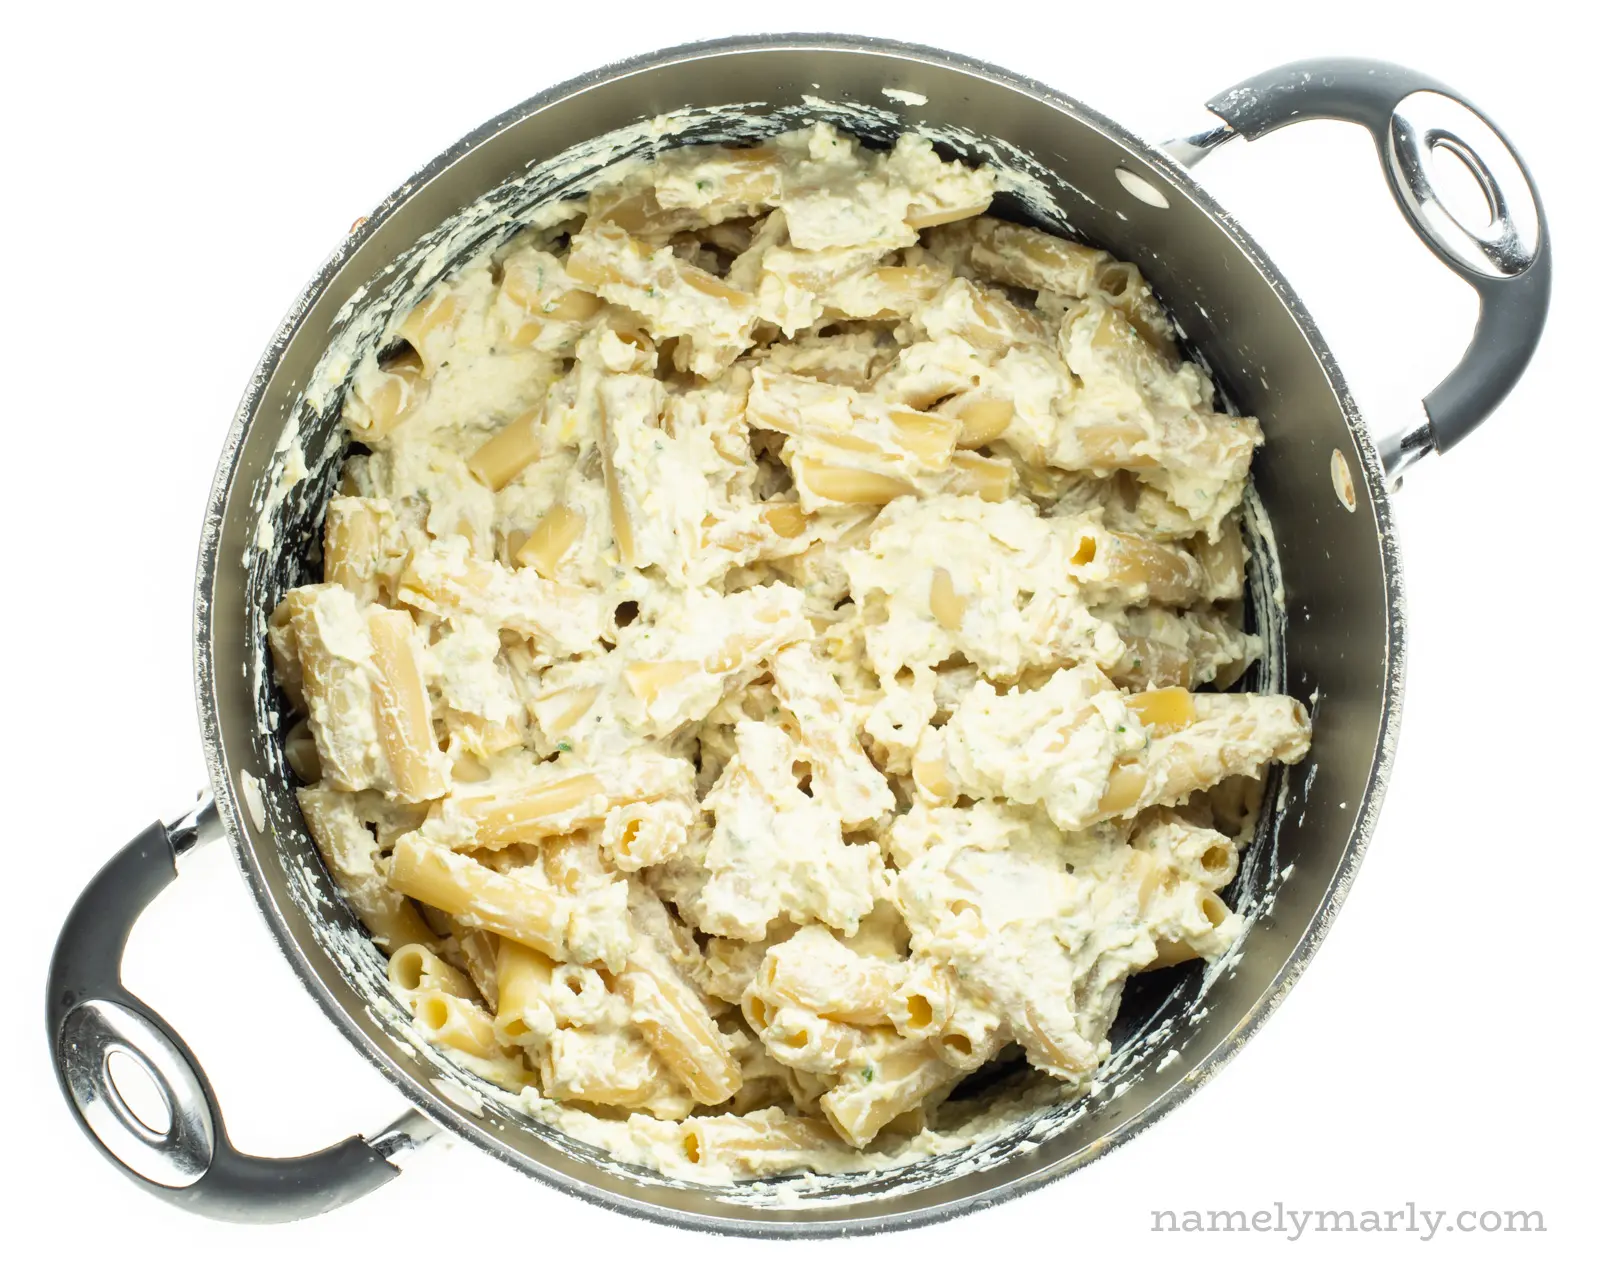 Vegan ricotta has been poured over cooked ziti in a large pot.